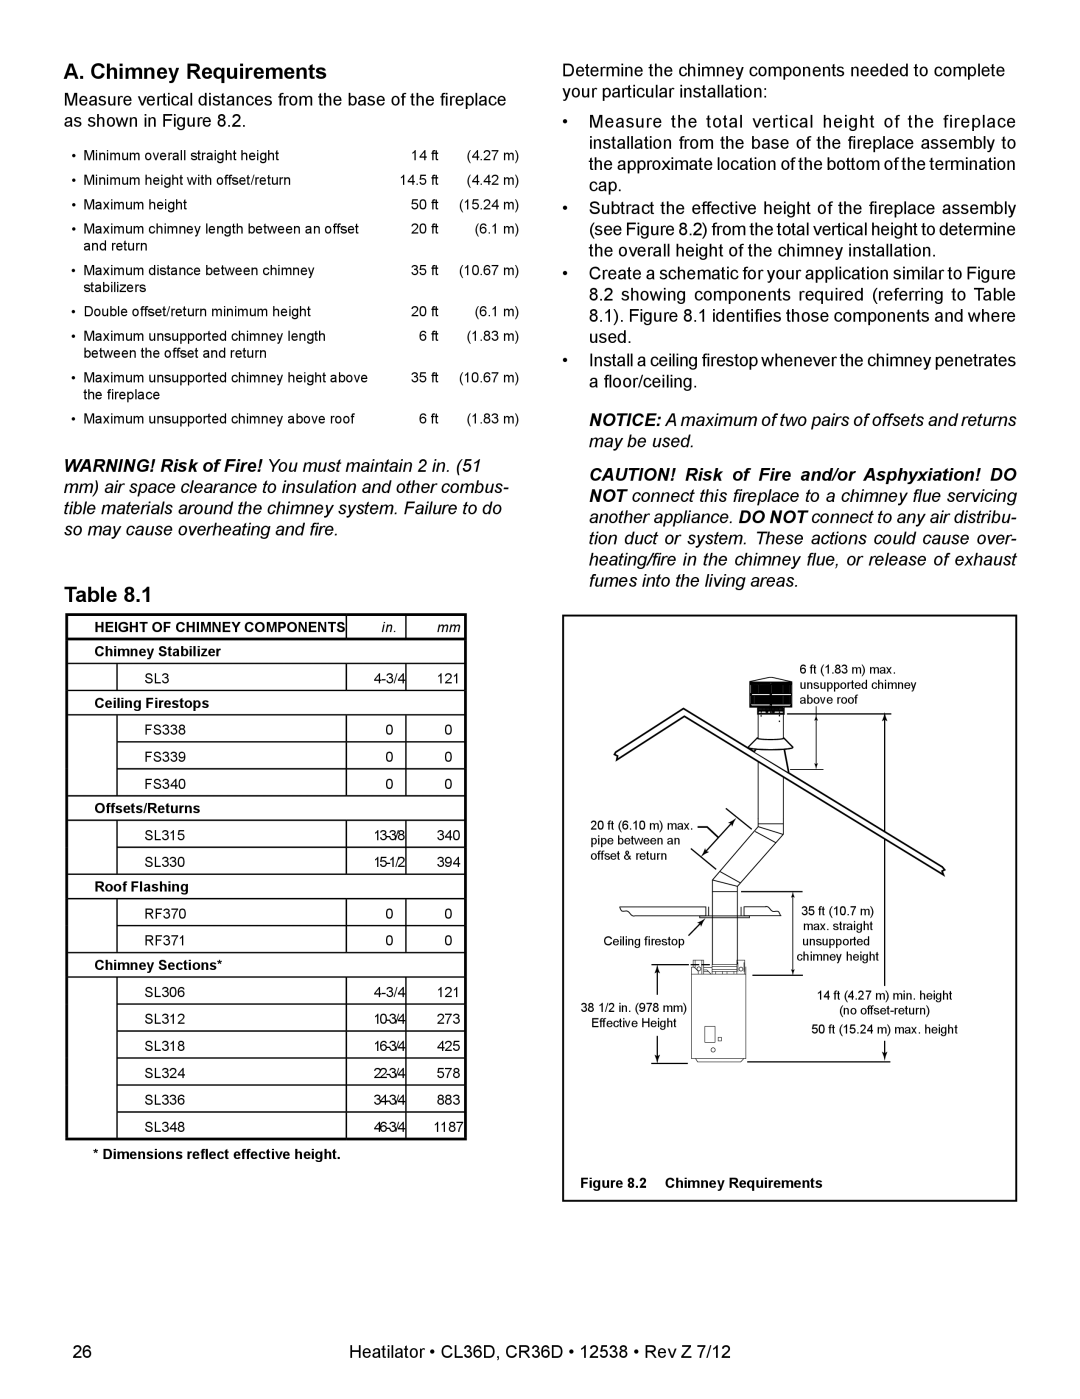 Heatiator CL36D owner manual A. Chimney Requirements, Table 